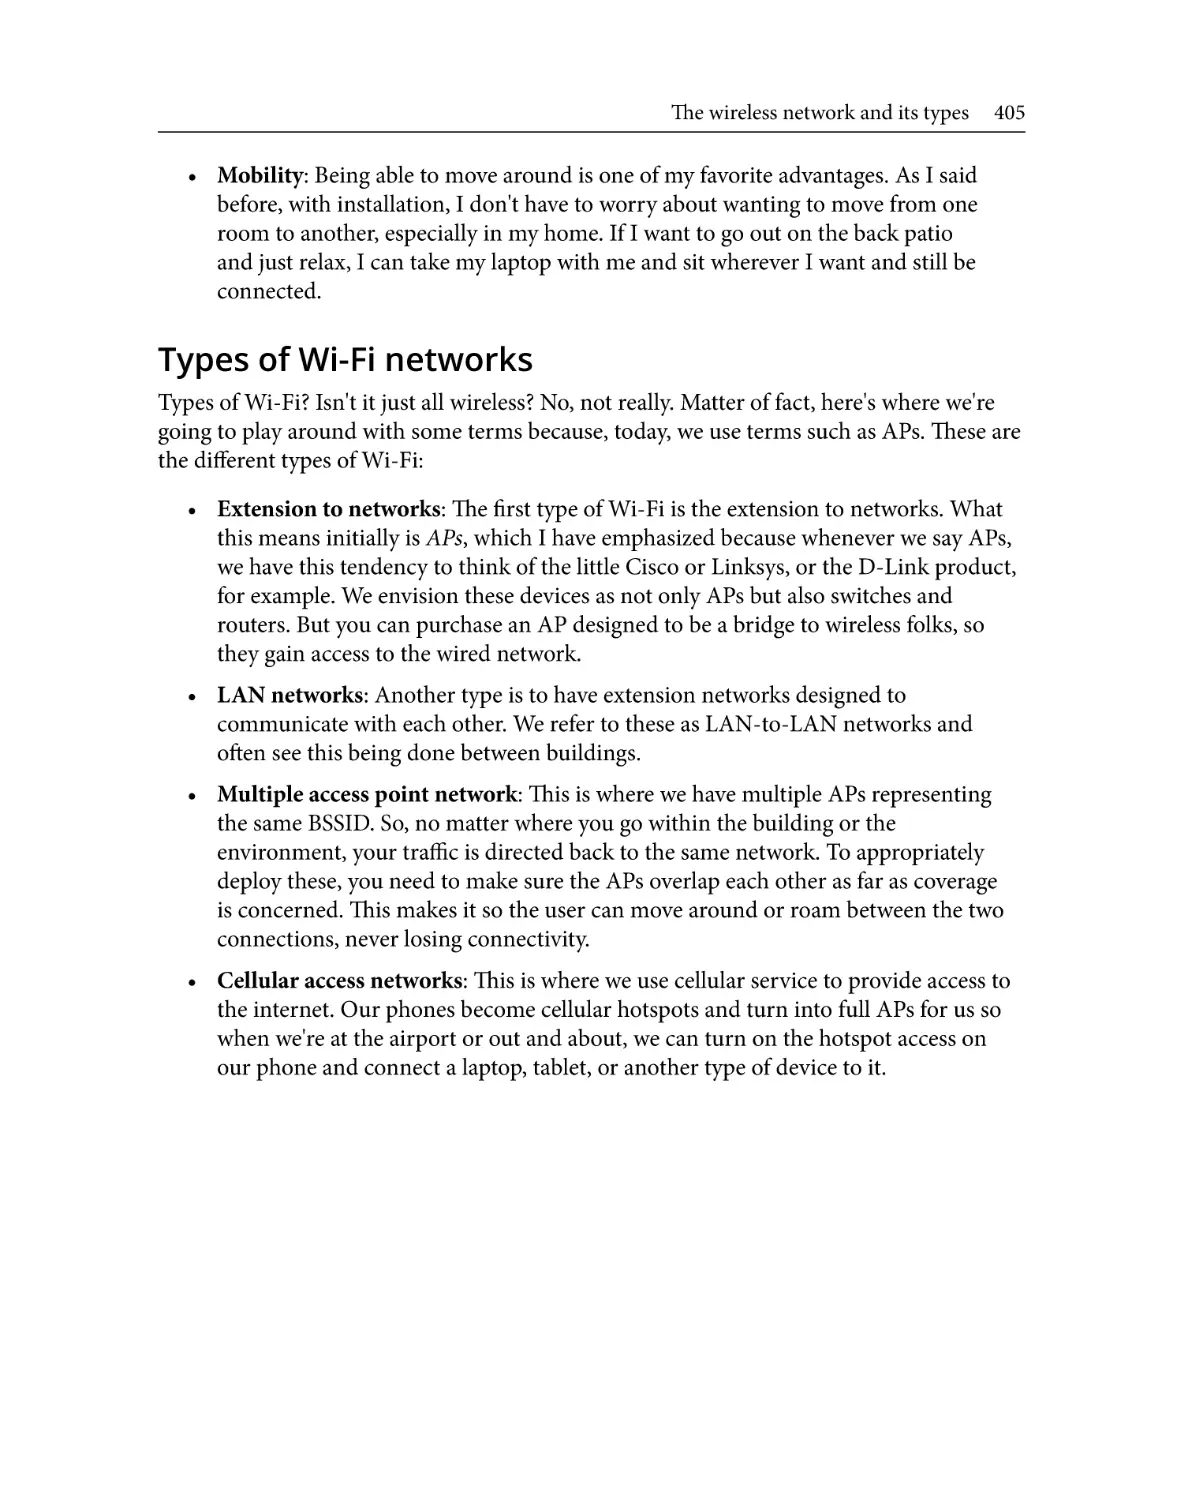 Types of Wi-Fi networks